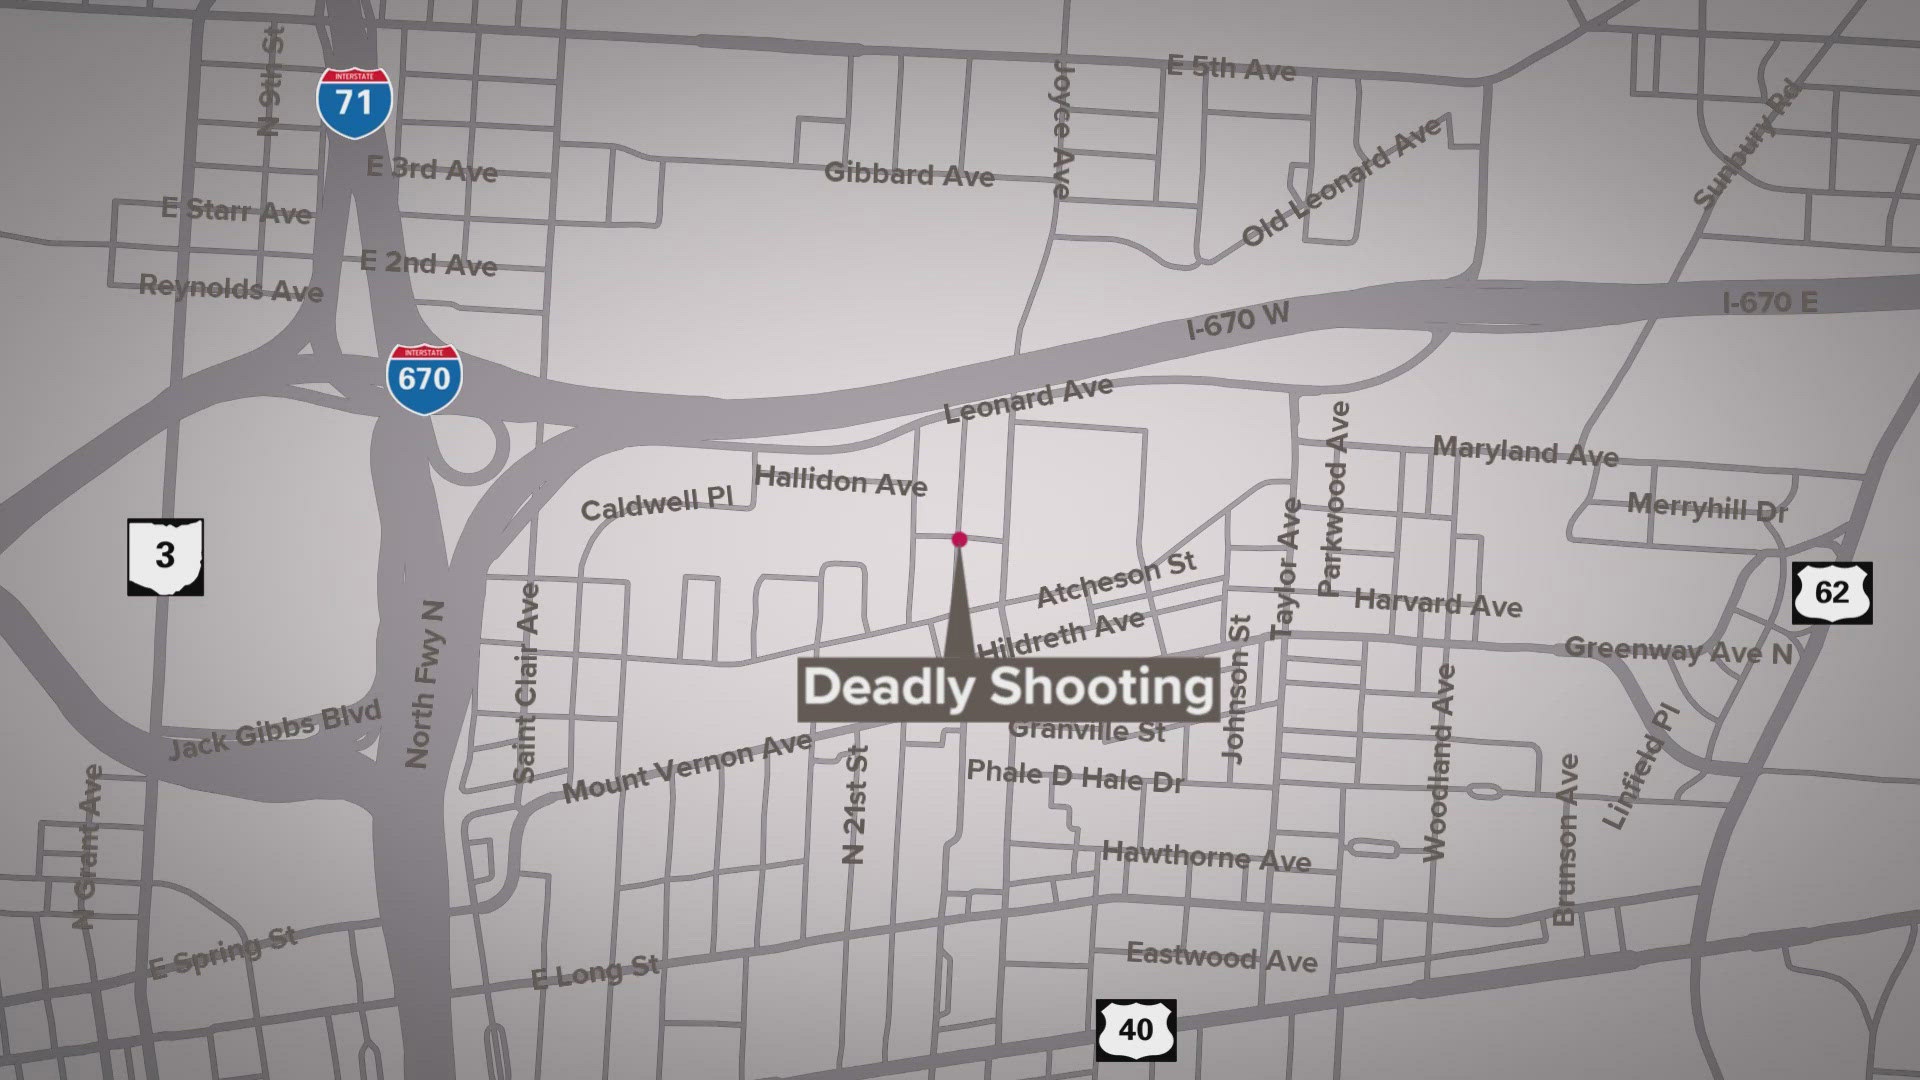 It is unclear what led up to the shooting. No suspect information is available at this time.